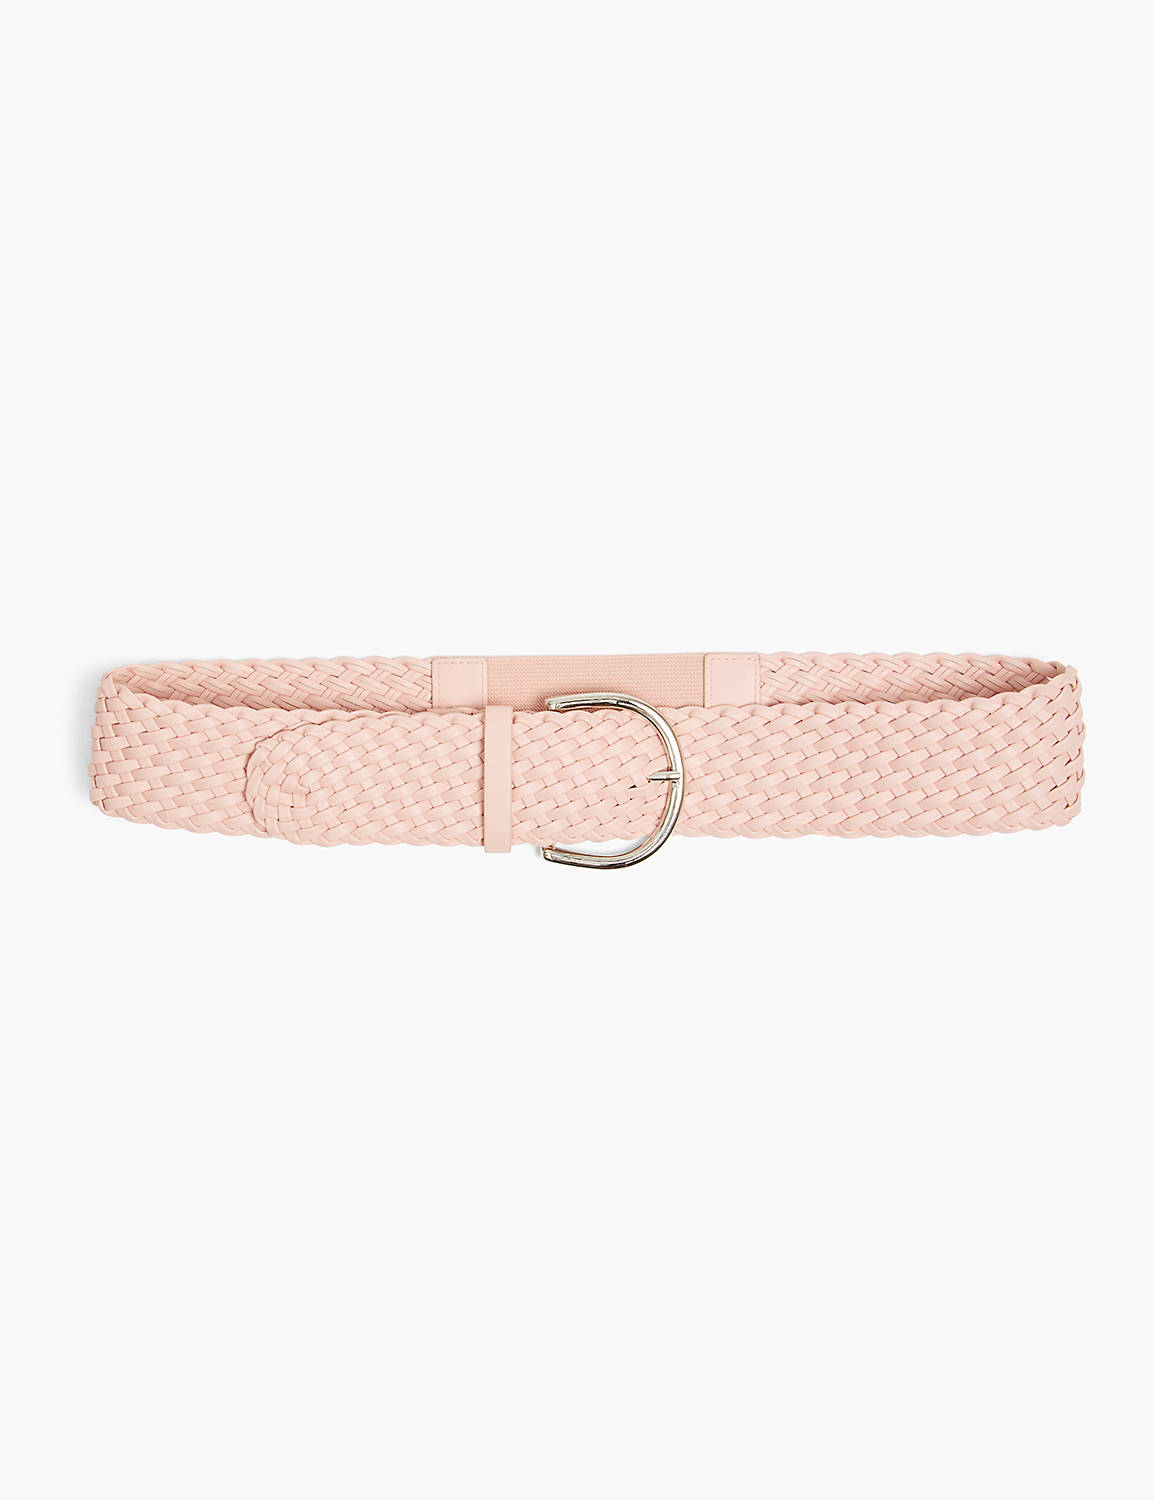 1140792 WIDE BRAIDED BELT Product Image 1